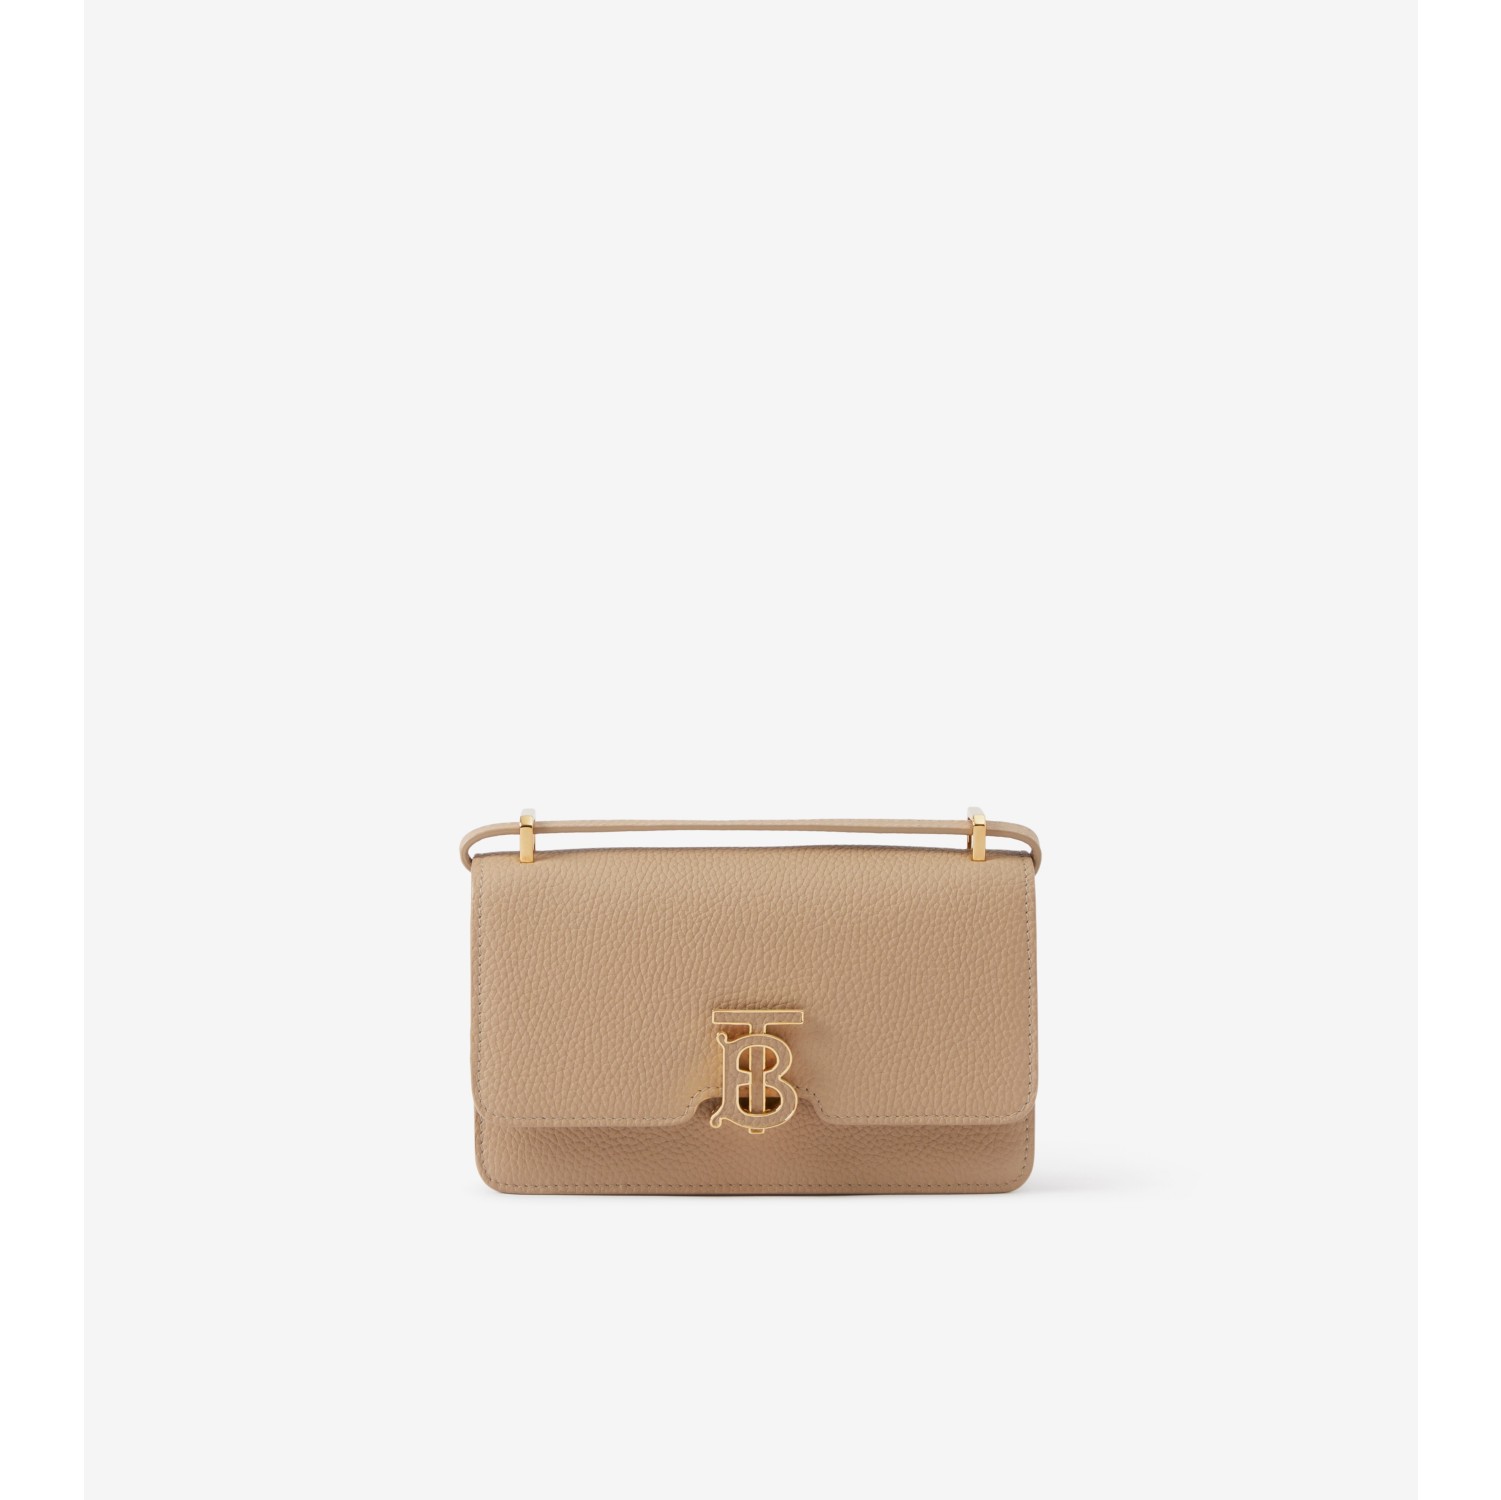 Burberry 'tb' Monogram Clasp Leather Belt Bag in Brown